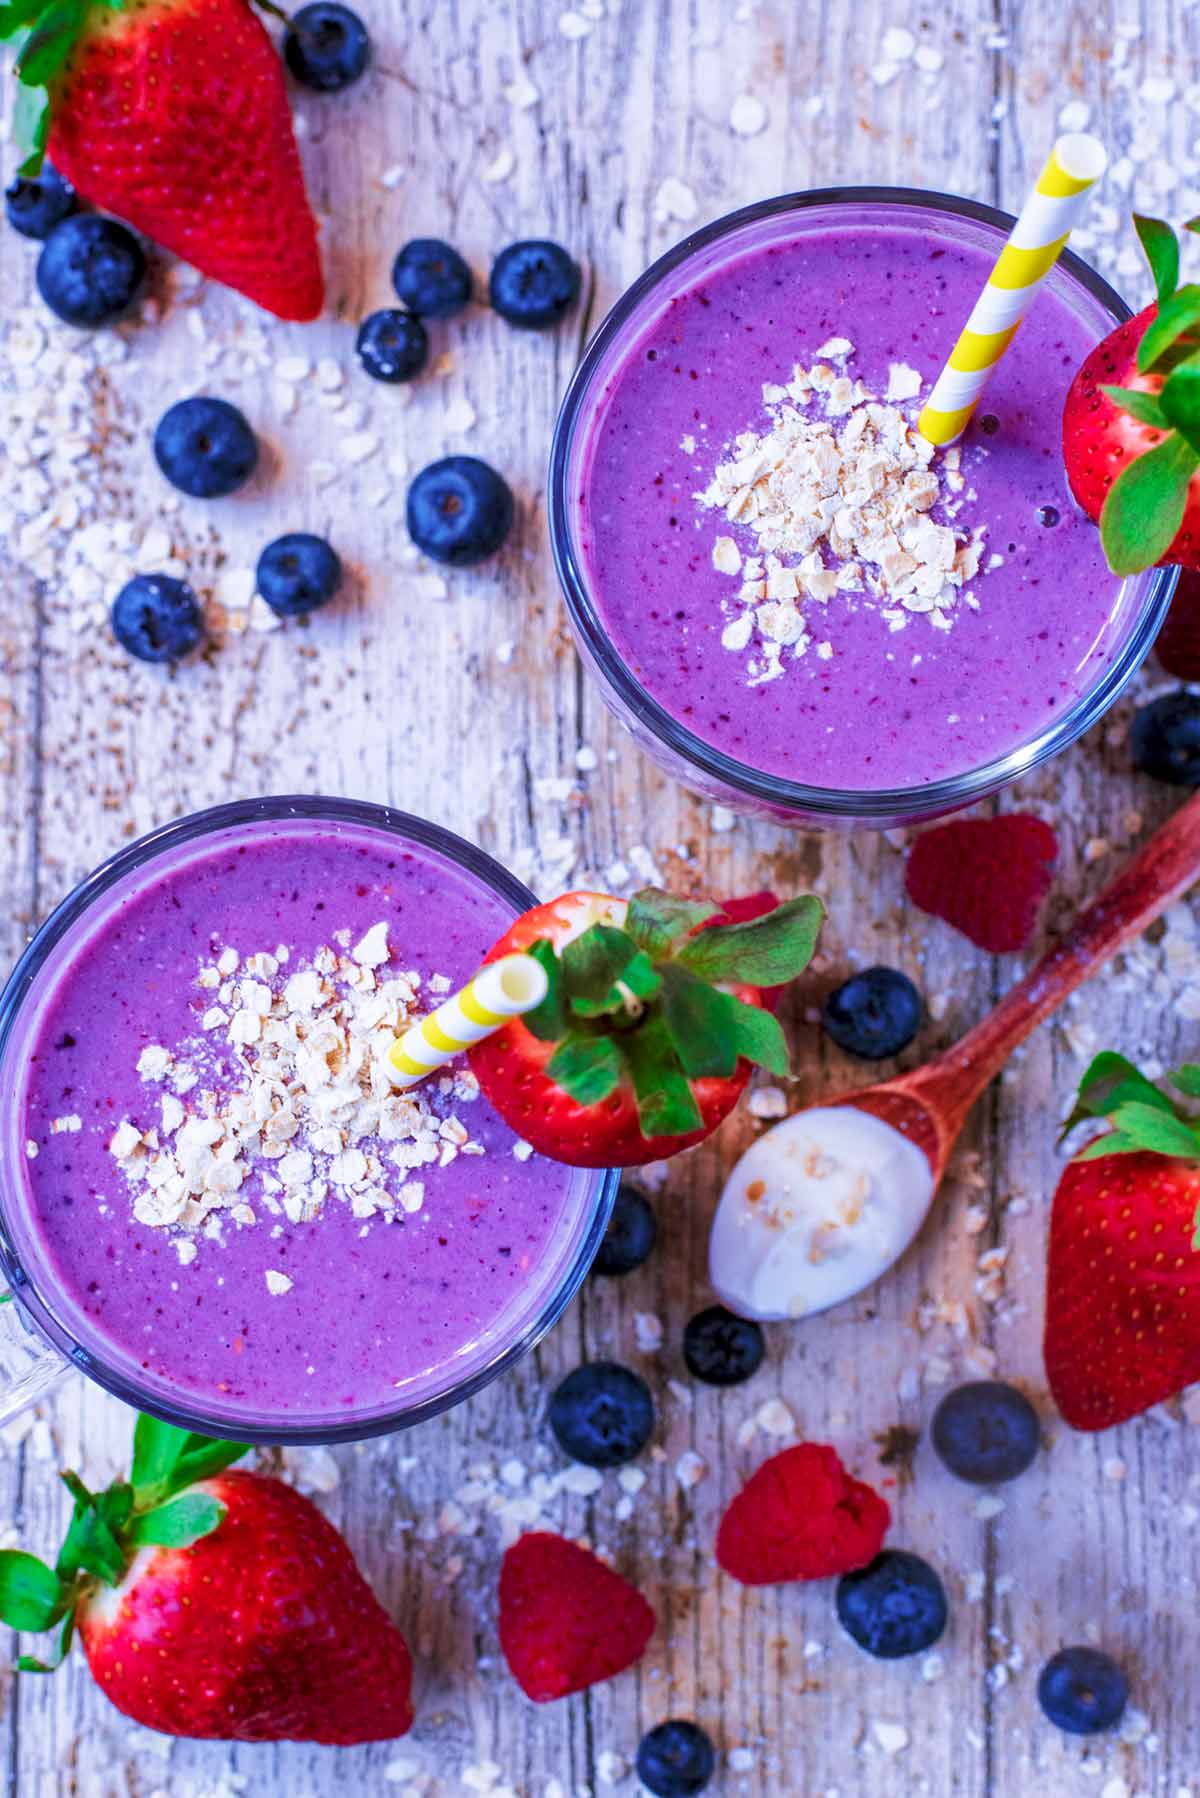 Oats and strawberries on top of two glasses of purple coloured smoothies as viewed from above.